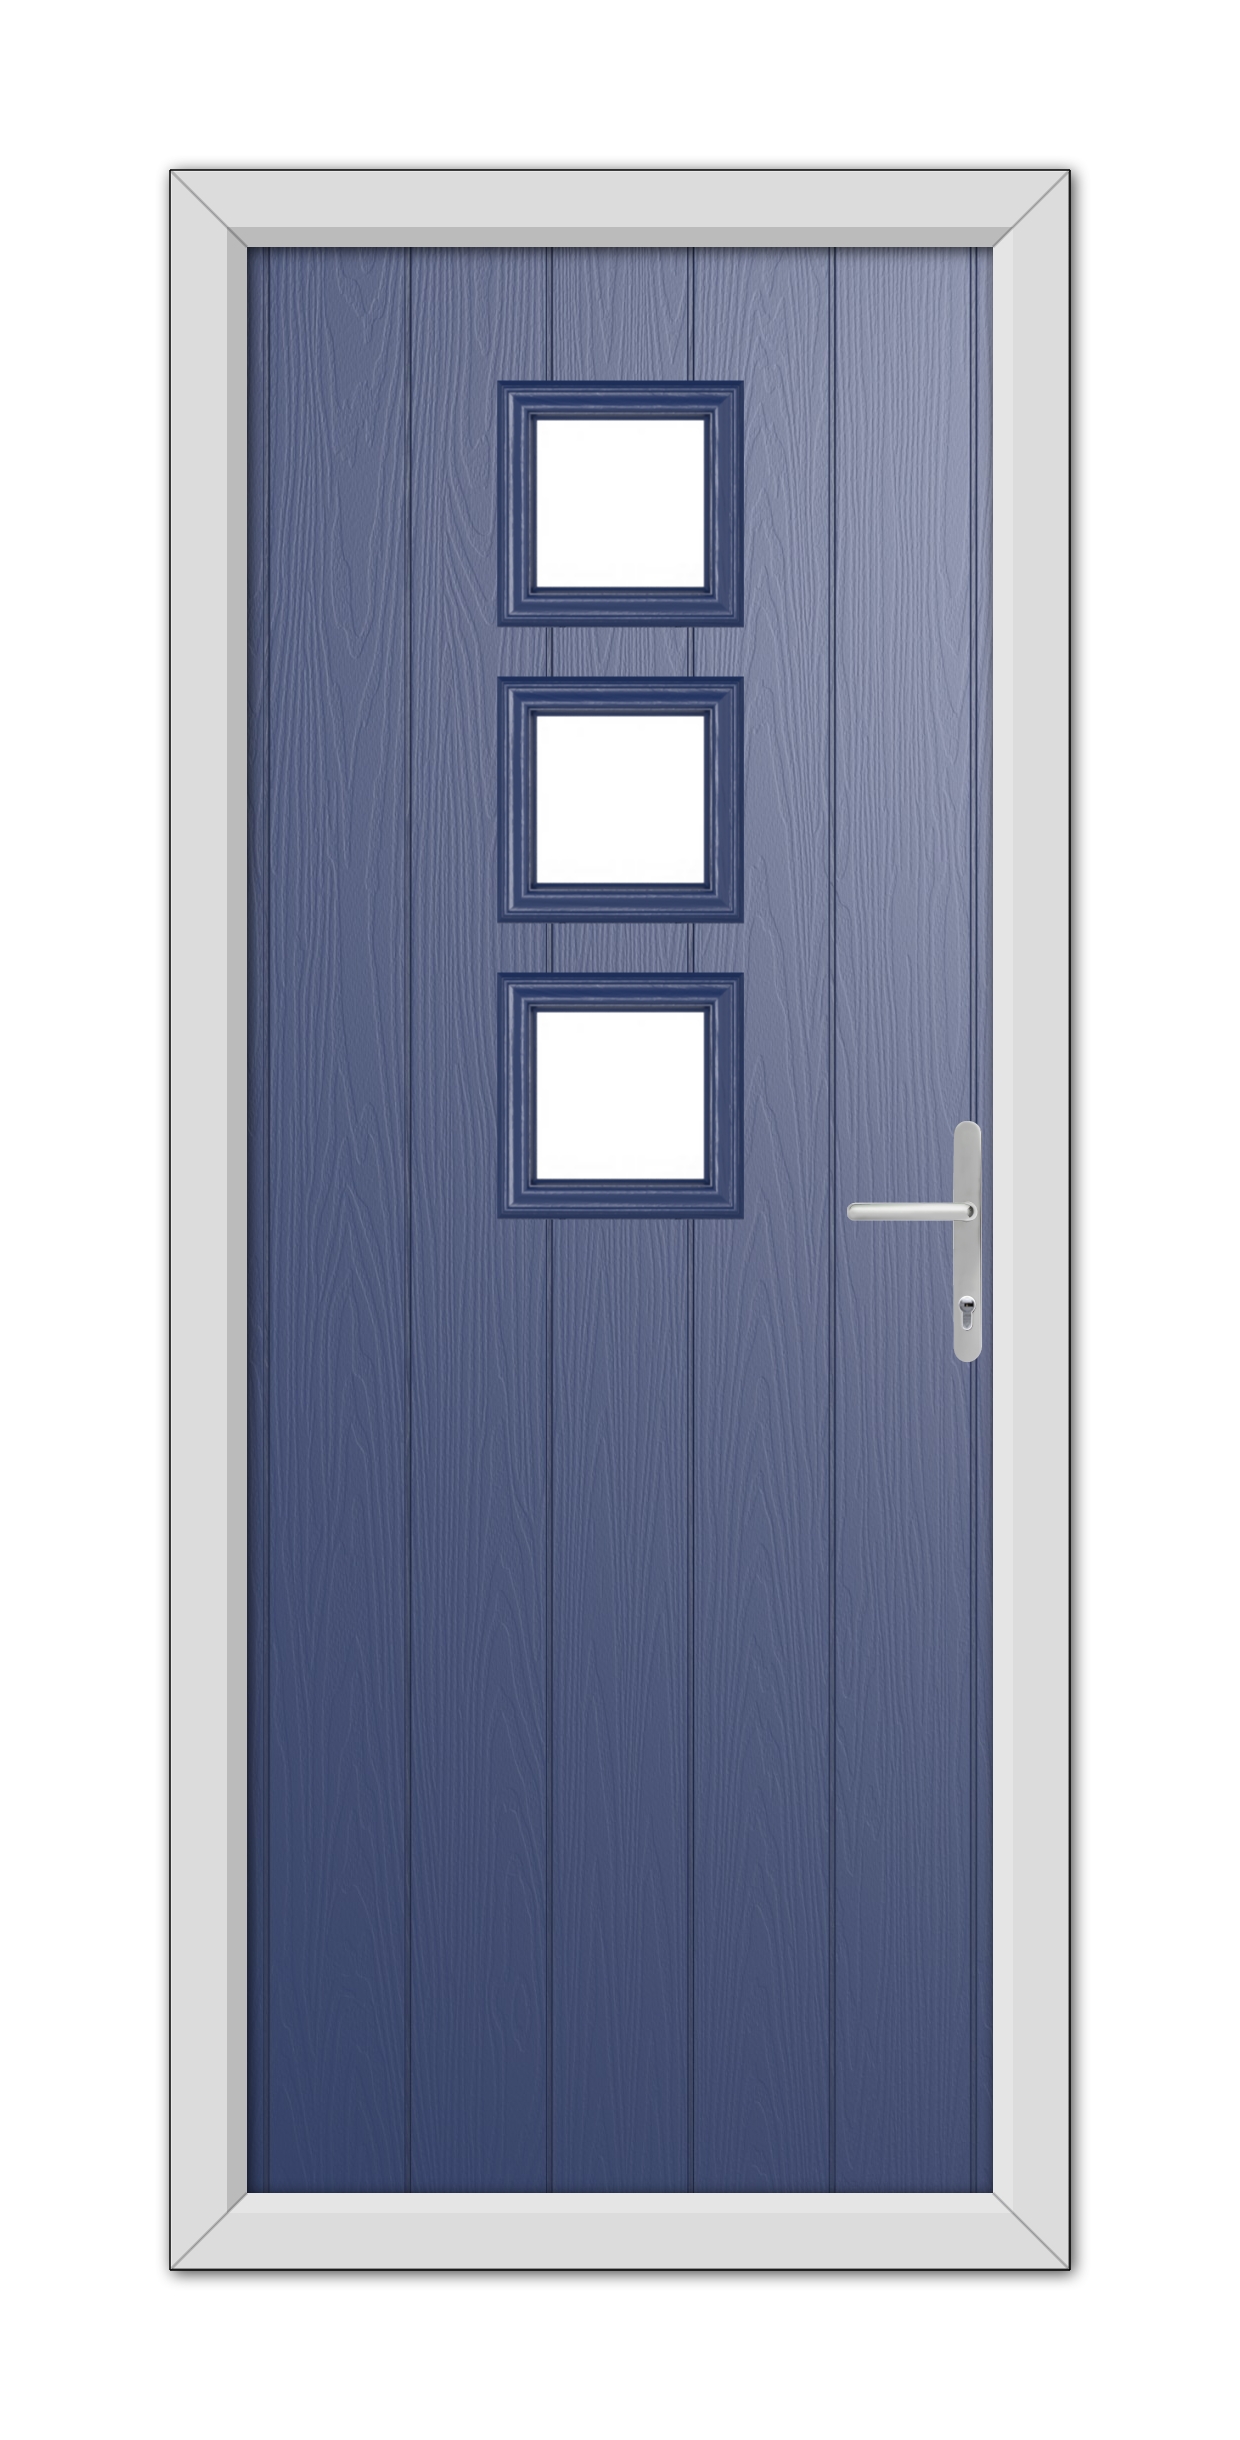 A modern Blue Montrose Composite Door 48mm Timber Core with a metallic handle and three rectangular windows, set within a white door frame.